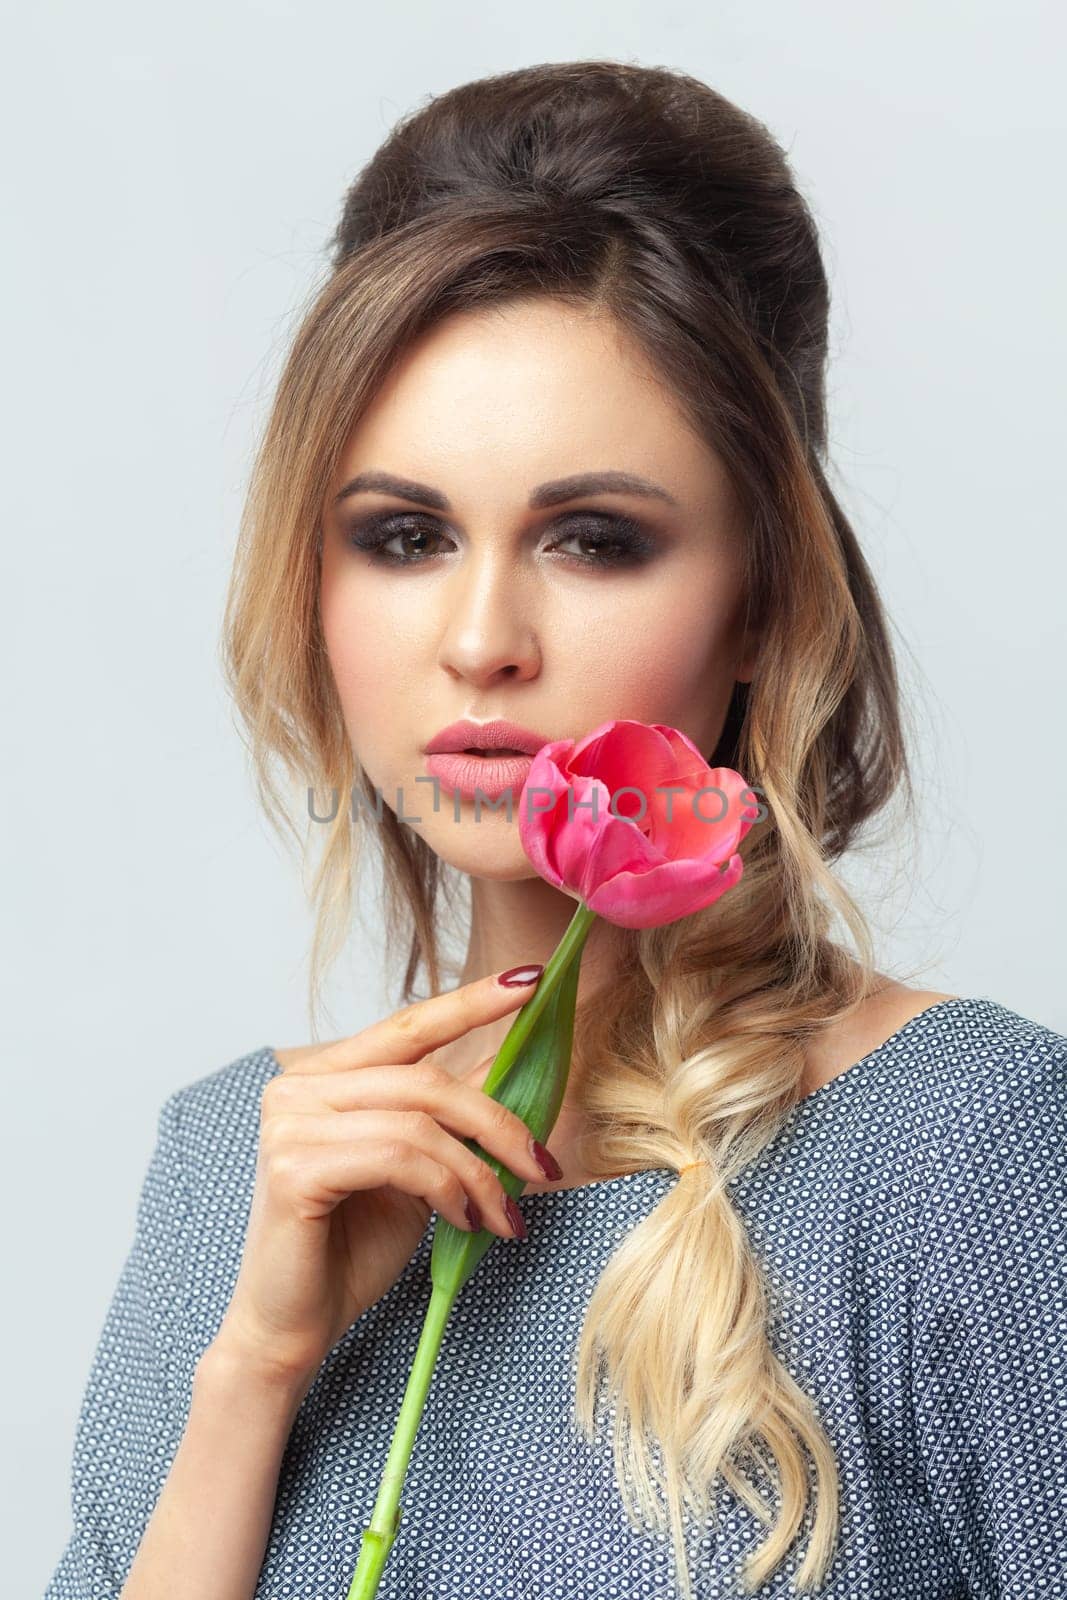 Attractive gentle blonde woman fashion model with makeup and hairstyle, holding tulip near her face. by Khosro1